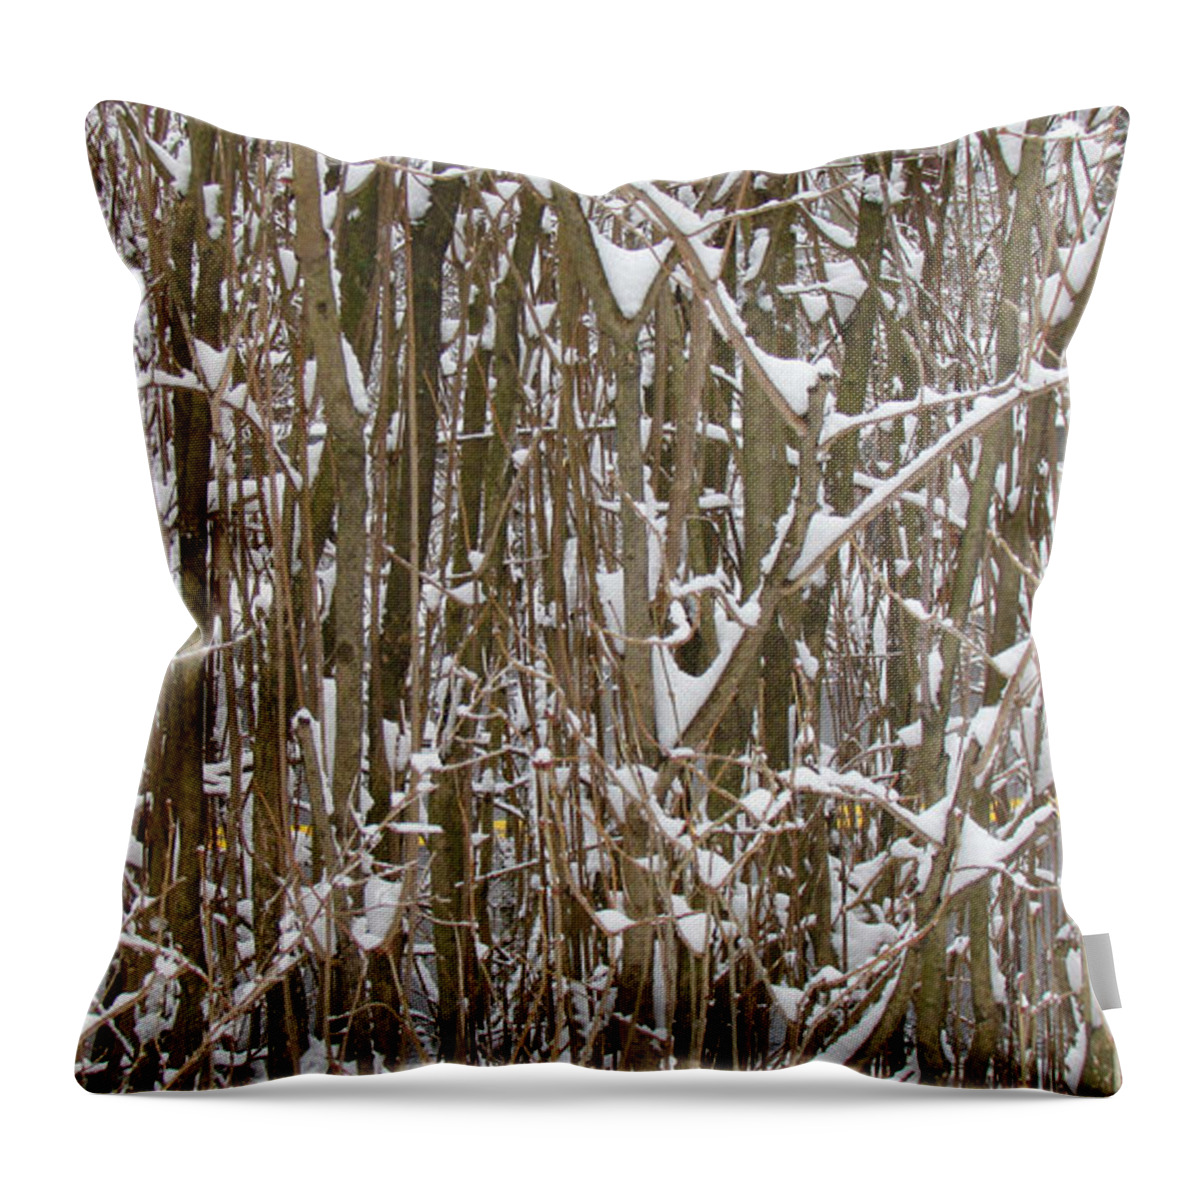 Background Throw Pillow featuring the photograph Branches and Twigs Covered in Fresh Snow by Jeelan Clark